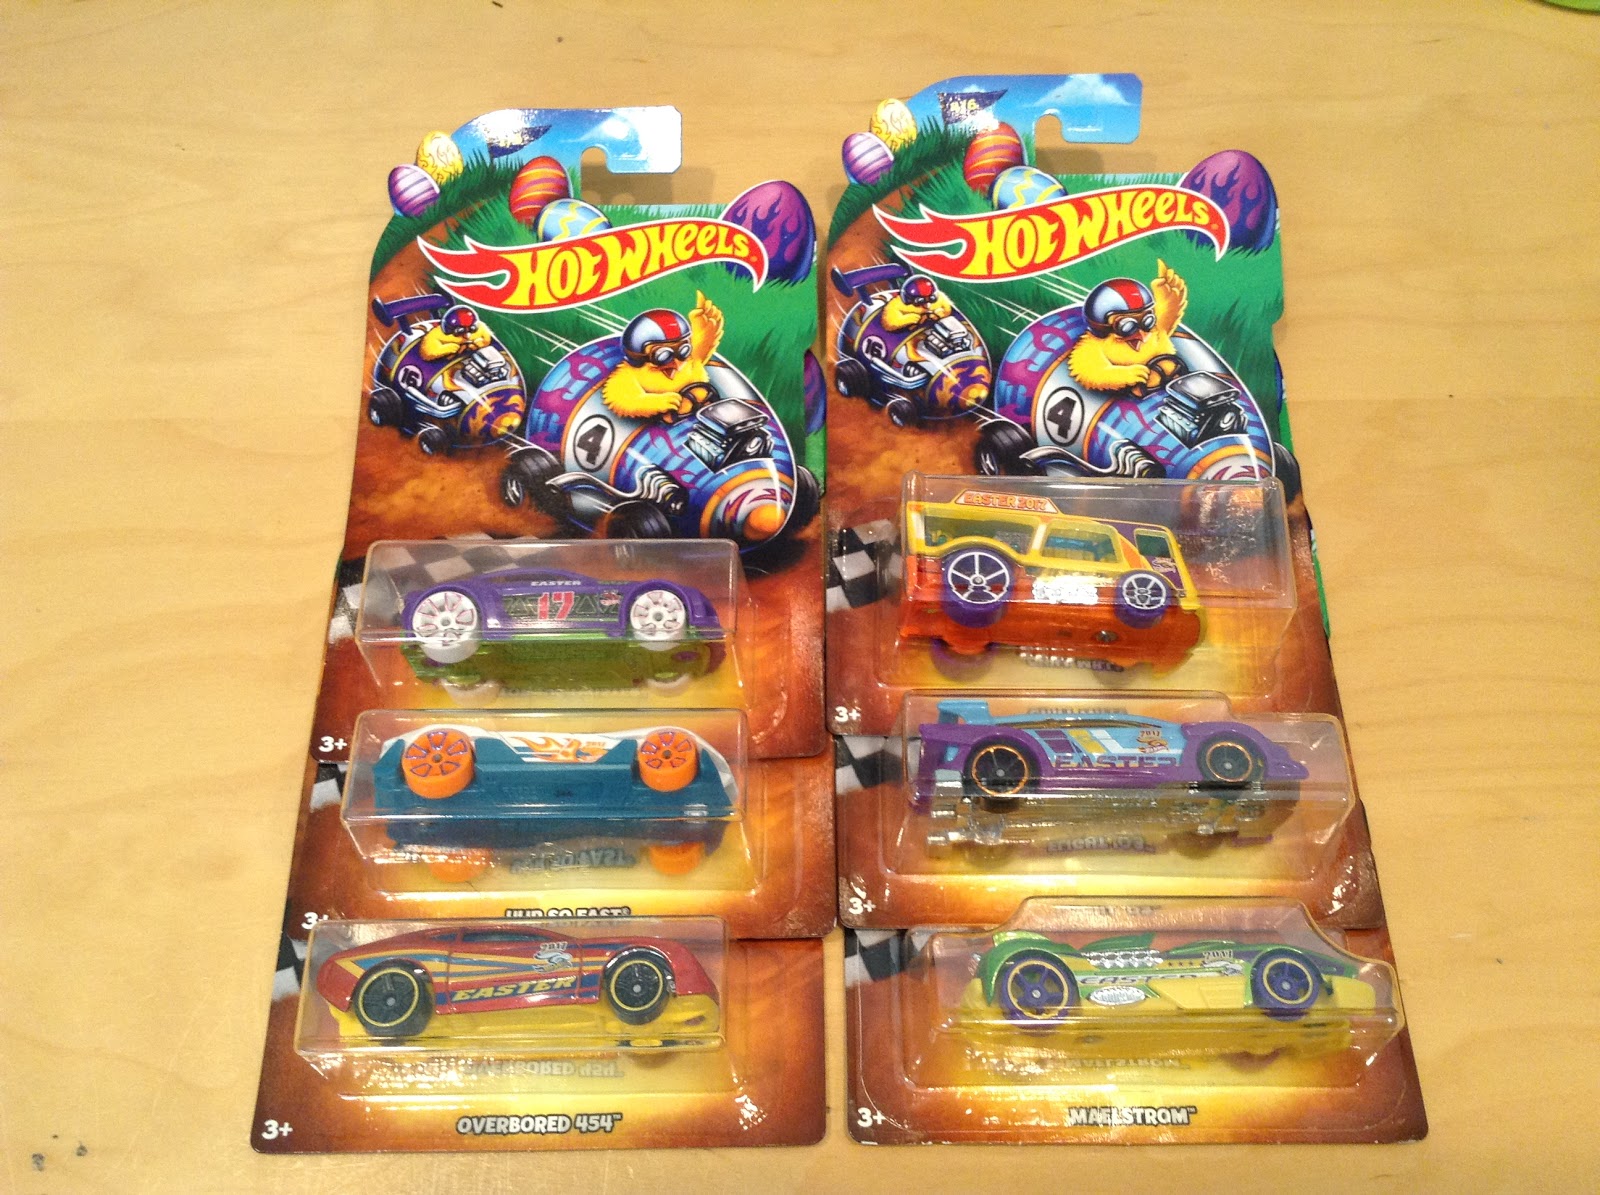 As usual, Walmart and Hot Wheels has provided another set of Easter cars! 